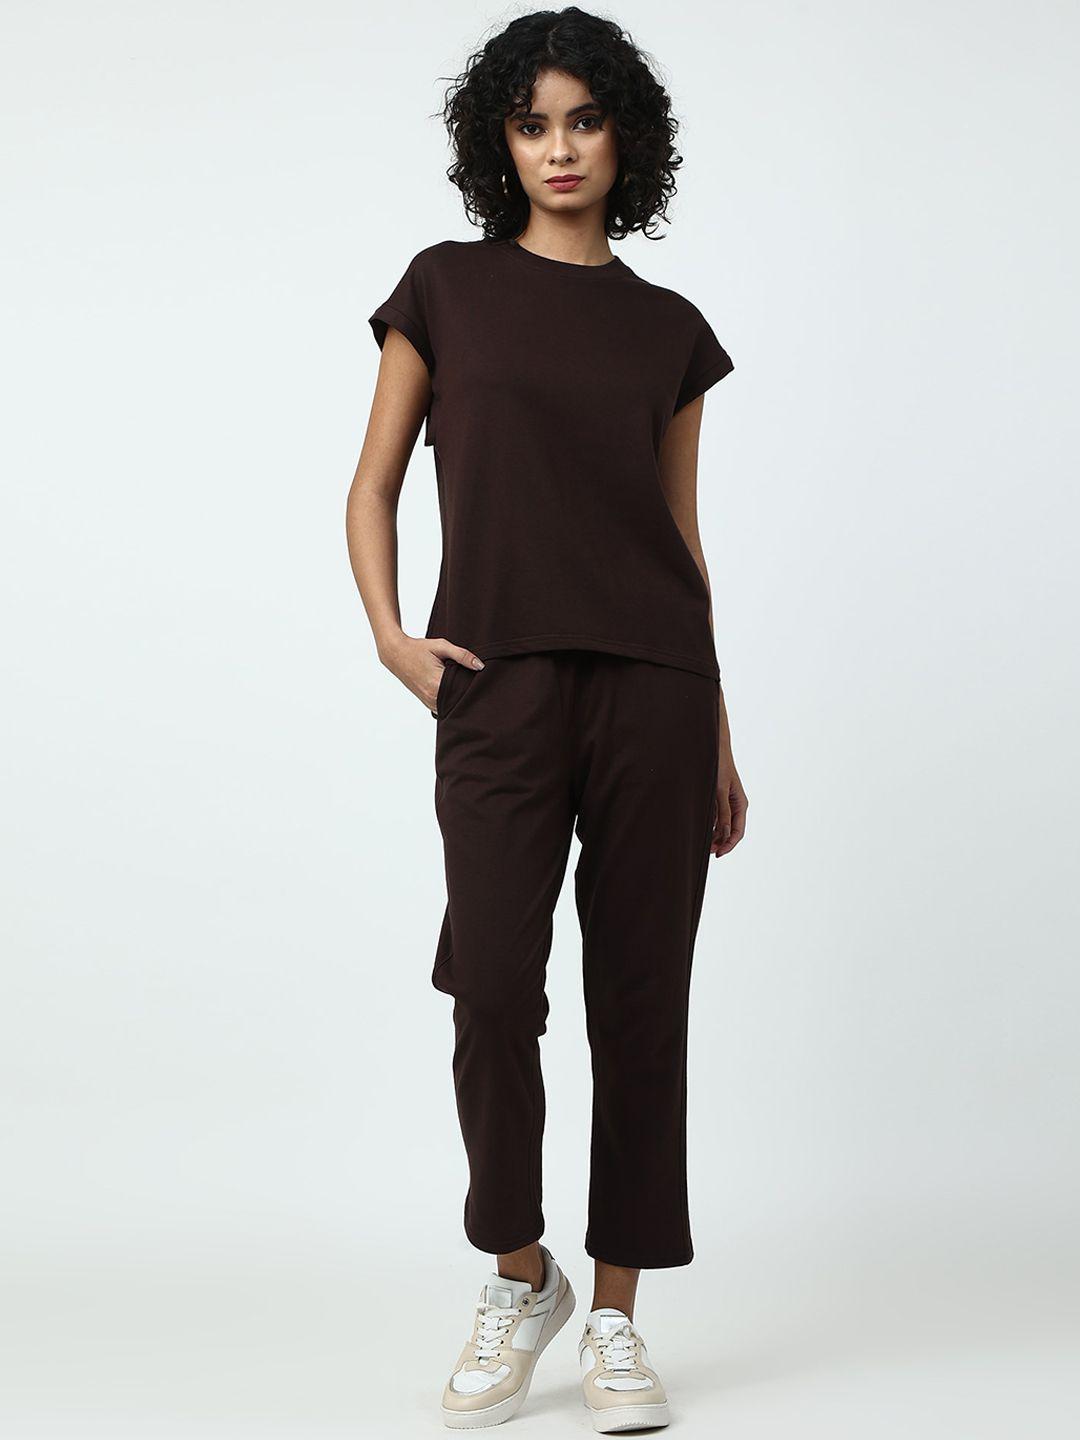 saltpetre-round-neck-short-sleeves-organic-cotton-t-shirt-with-trousers